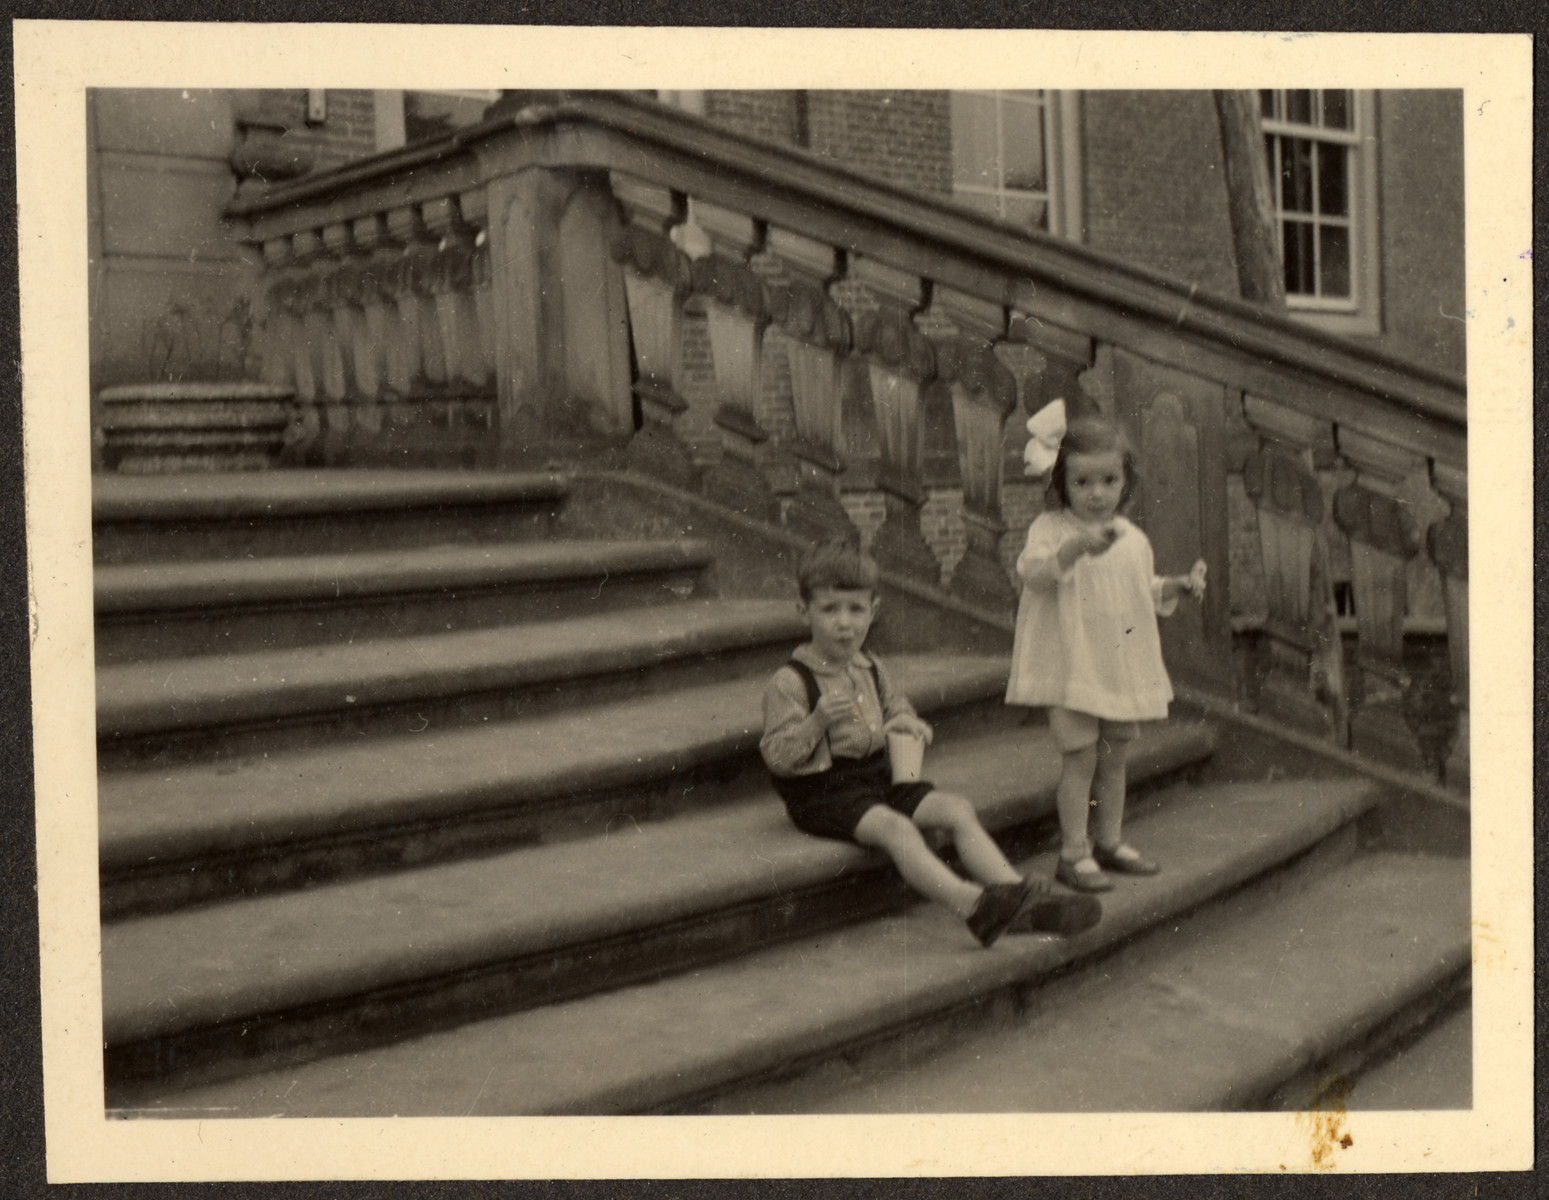 Two young children, probably German Jewish refugees, relax on the steps of a Quaker boarding school in Eerde.